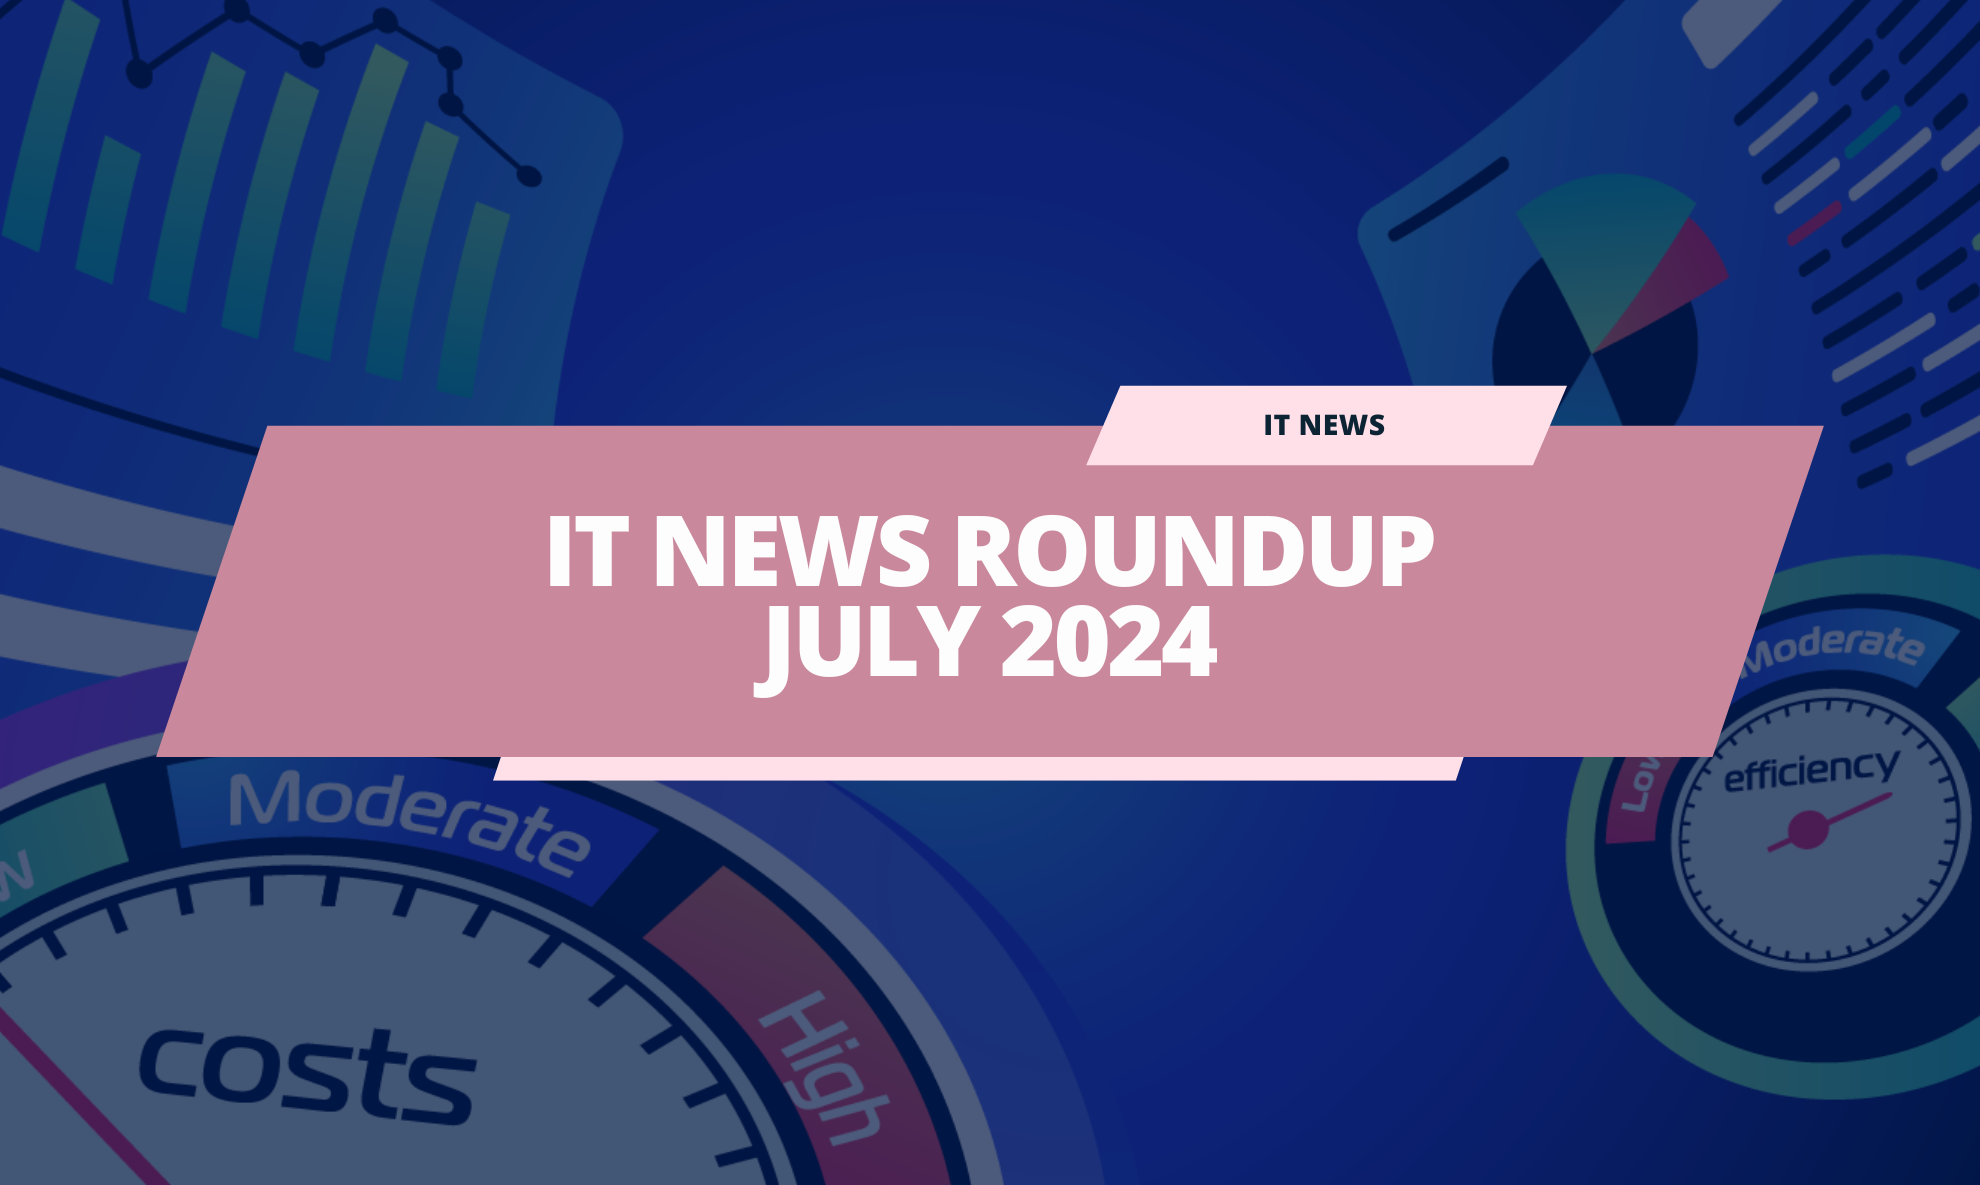 IT News: Your Monthly Dose of IT Buzz and Breakthroughs